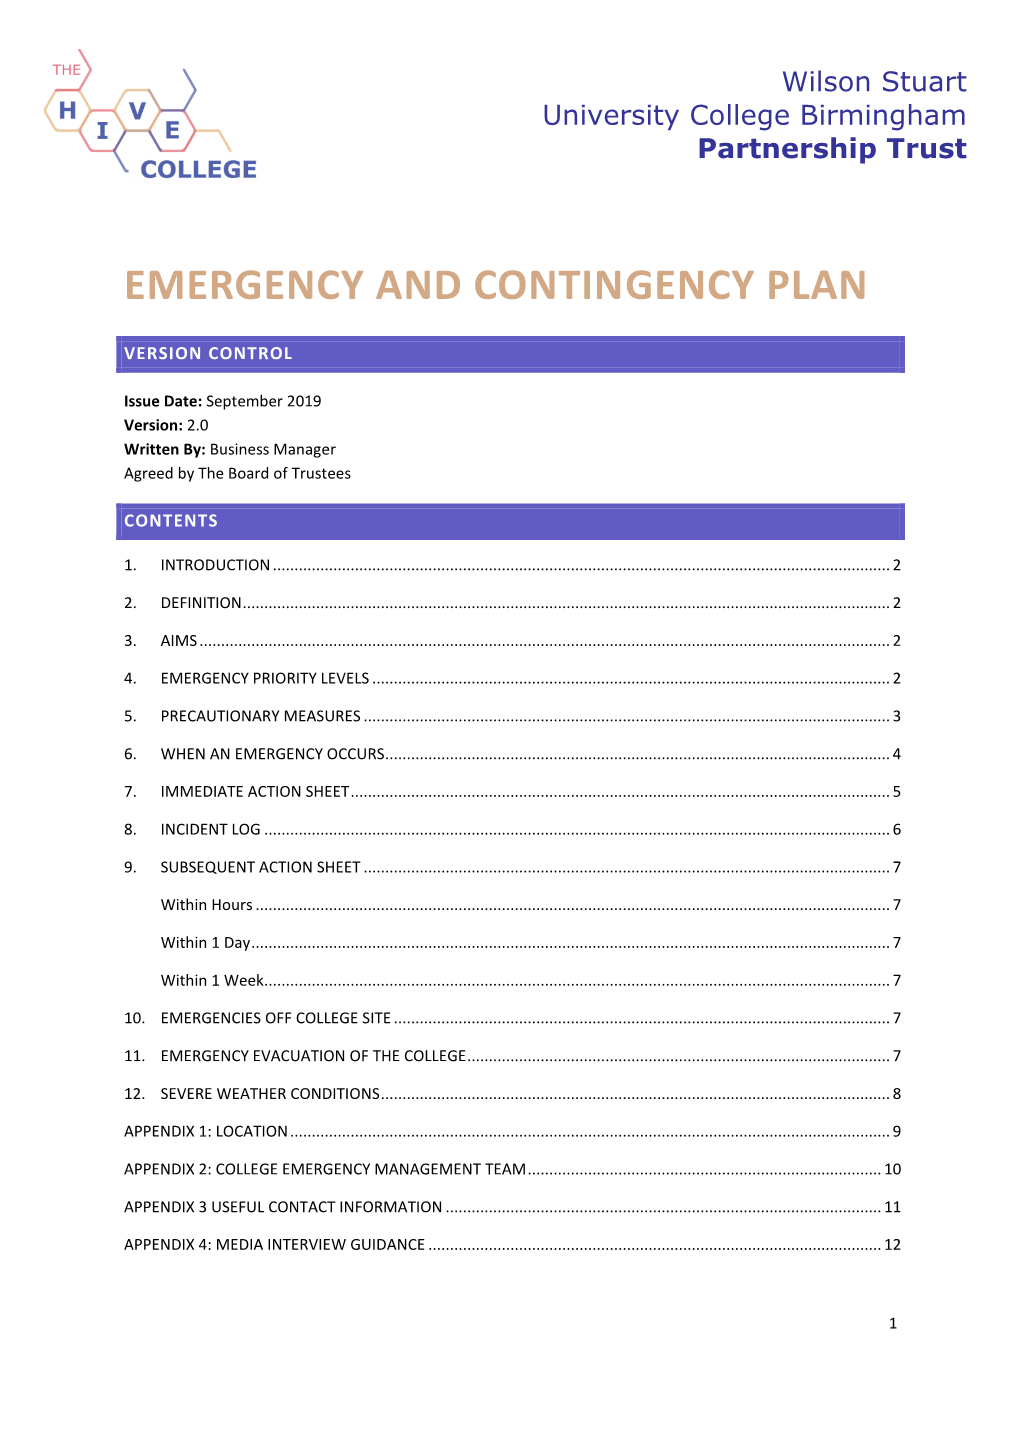 Emergency and Contingency Plan 2019